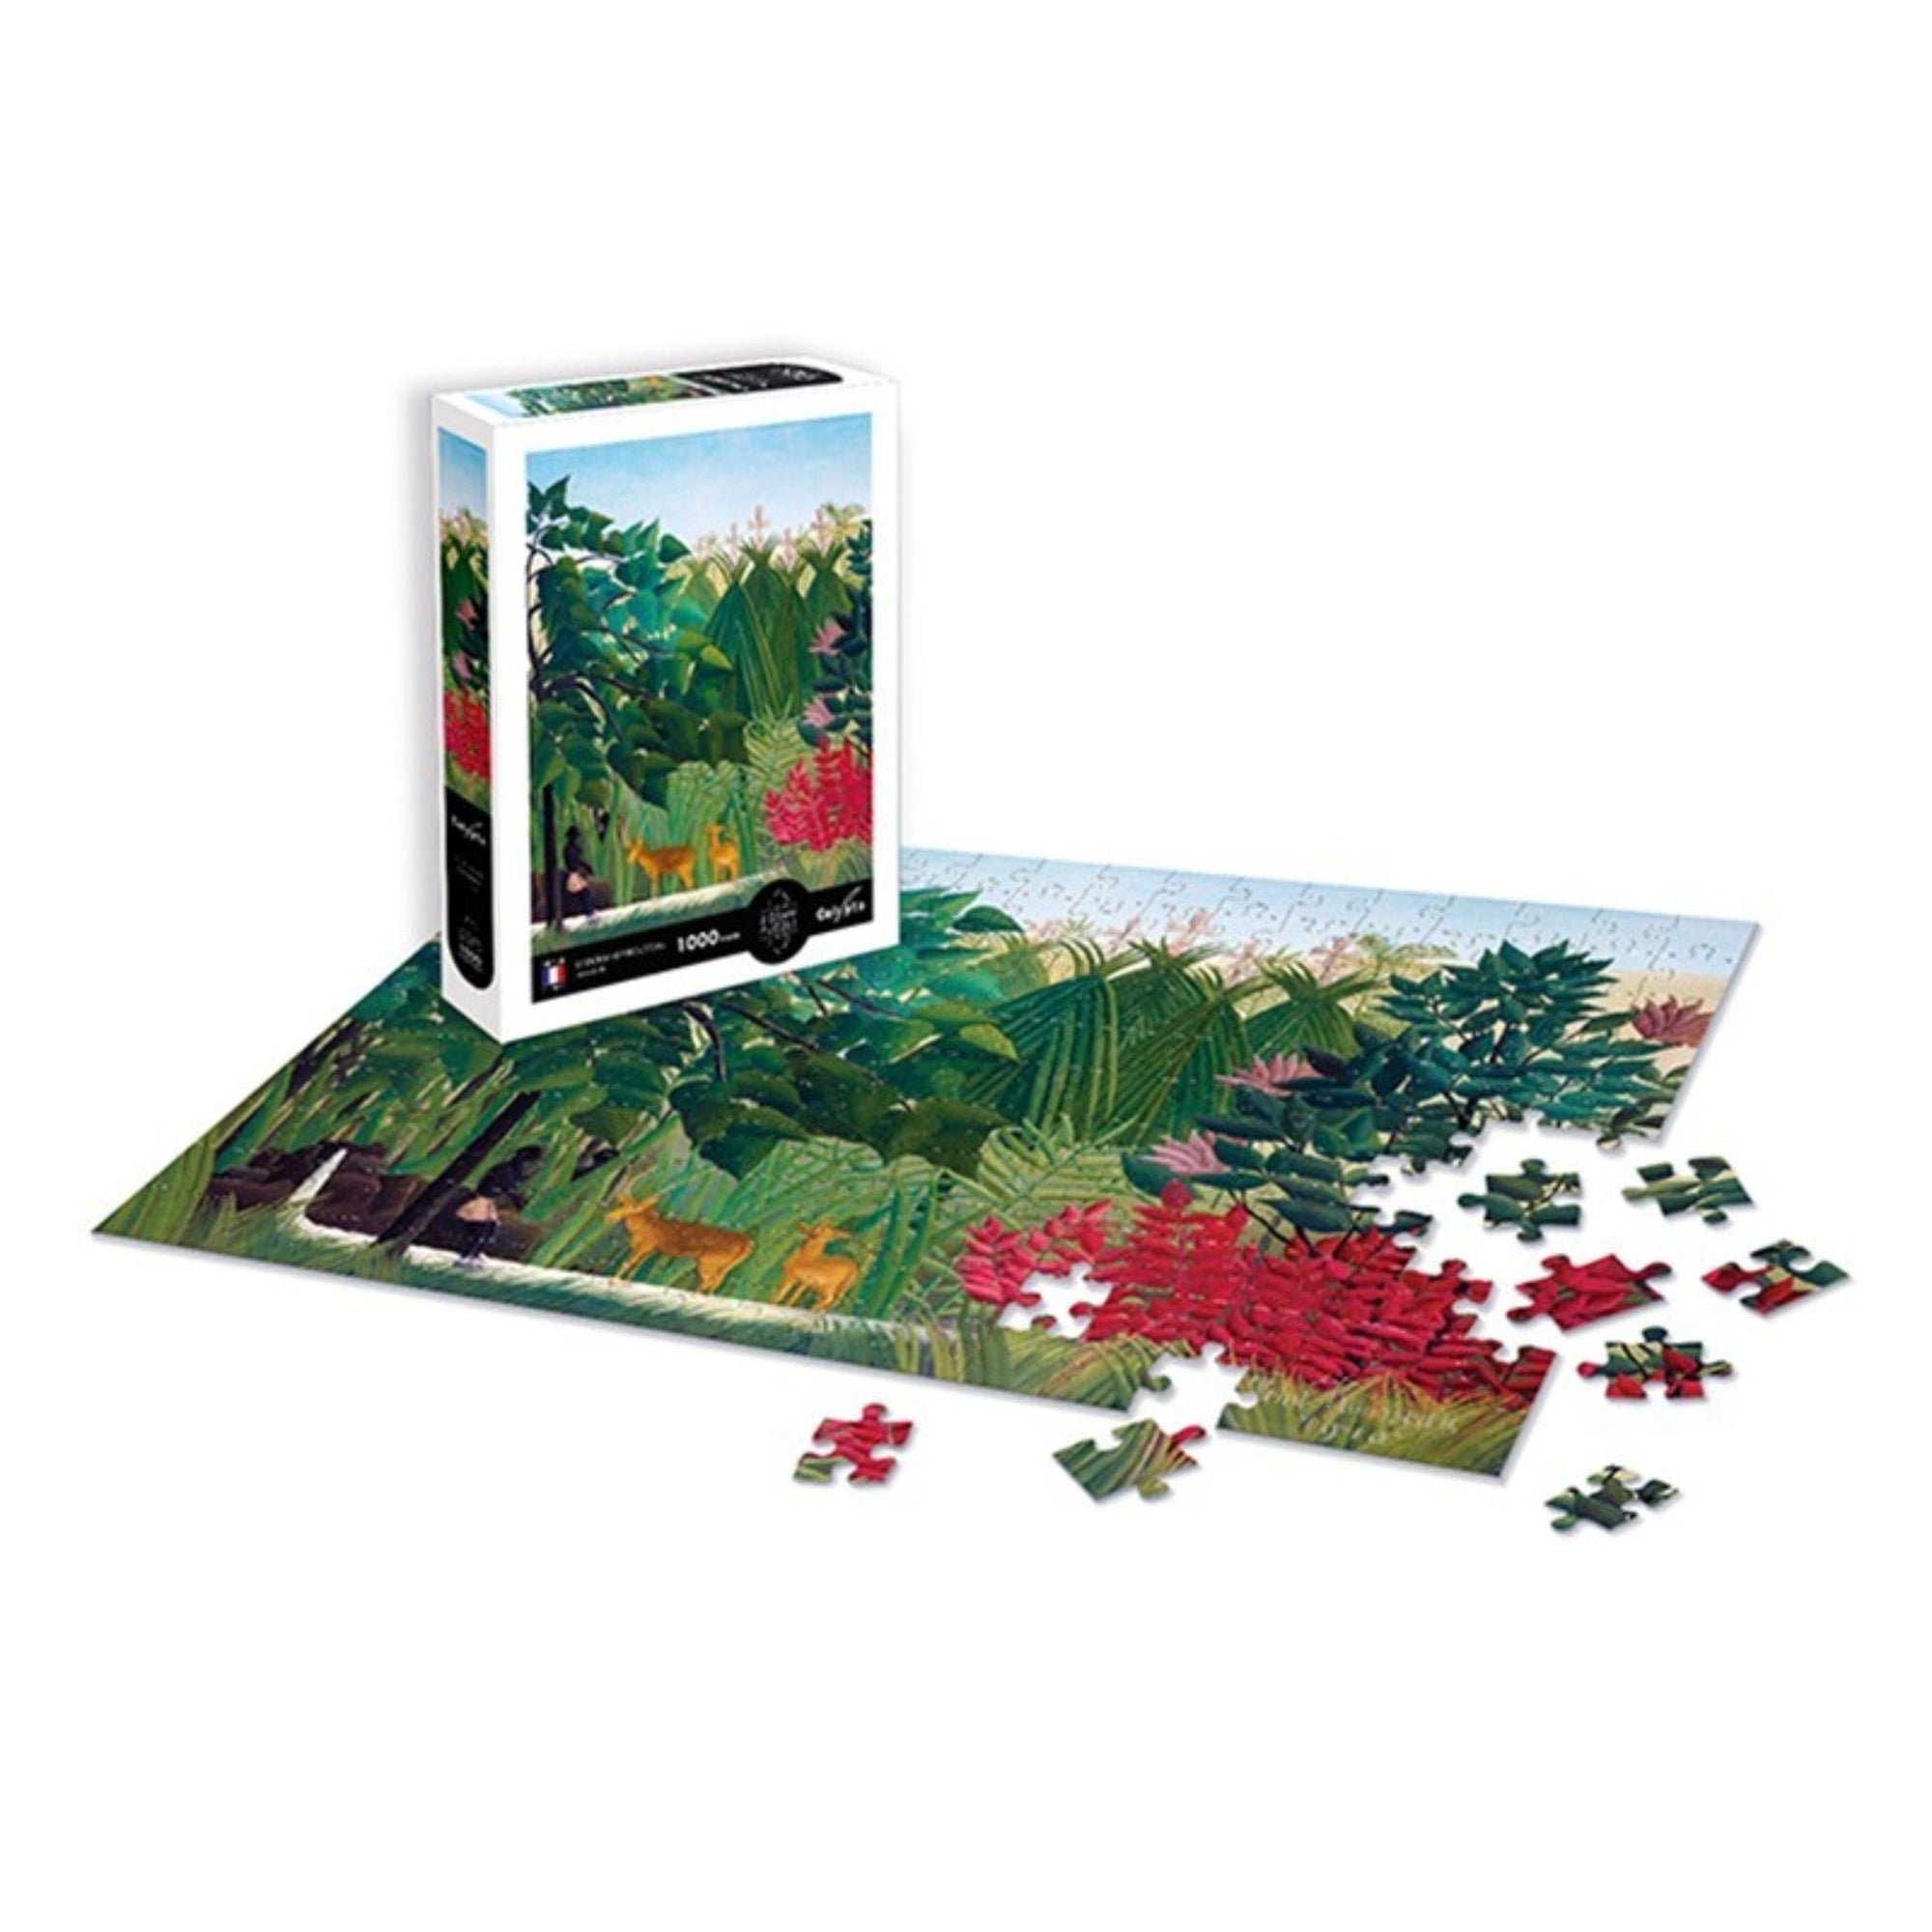 Calypto Puzzle - Le Douanier Rousseau (The Waterfall)